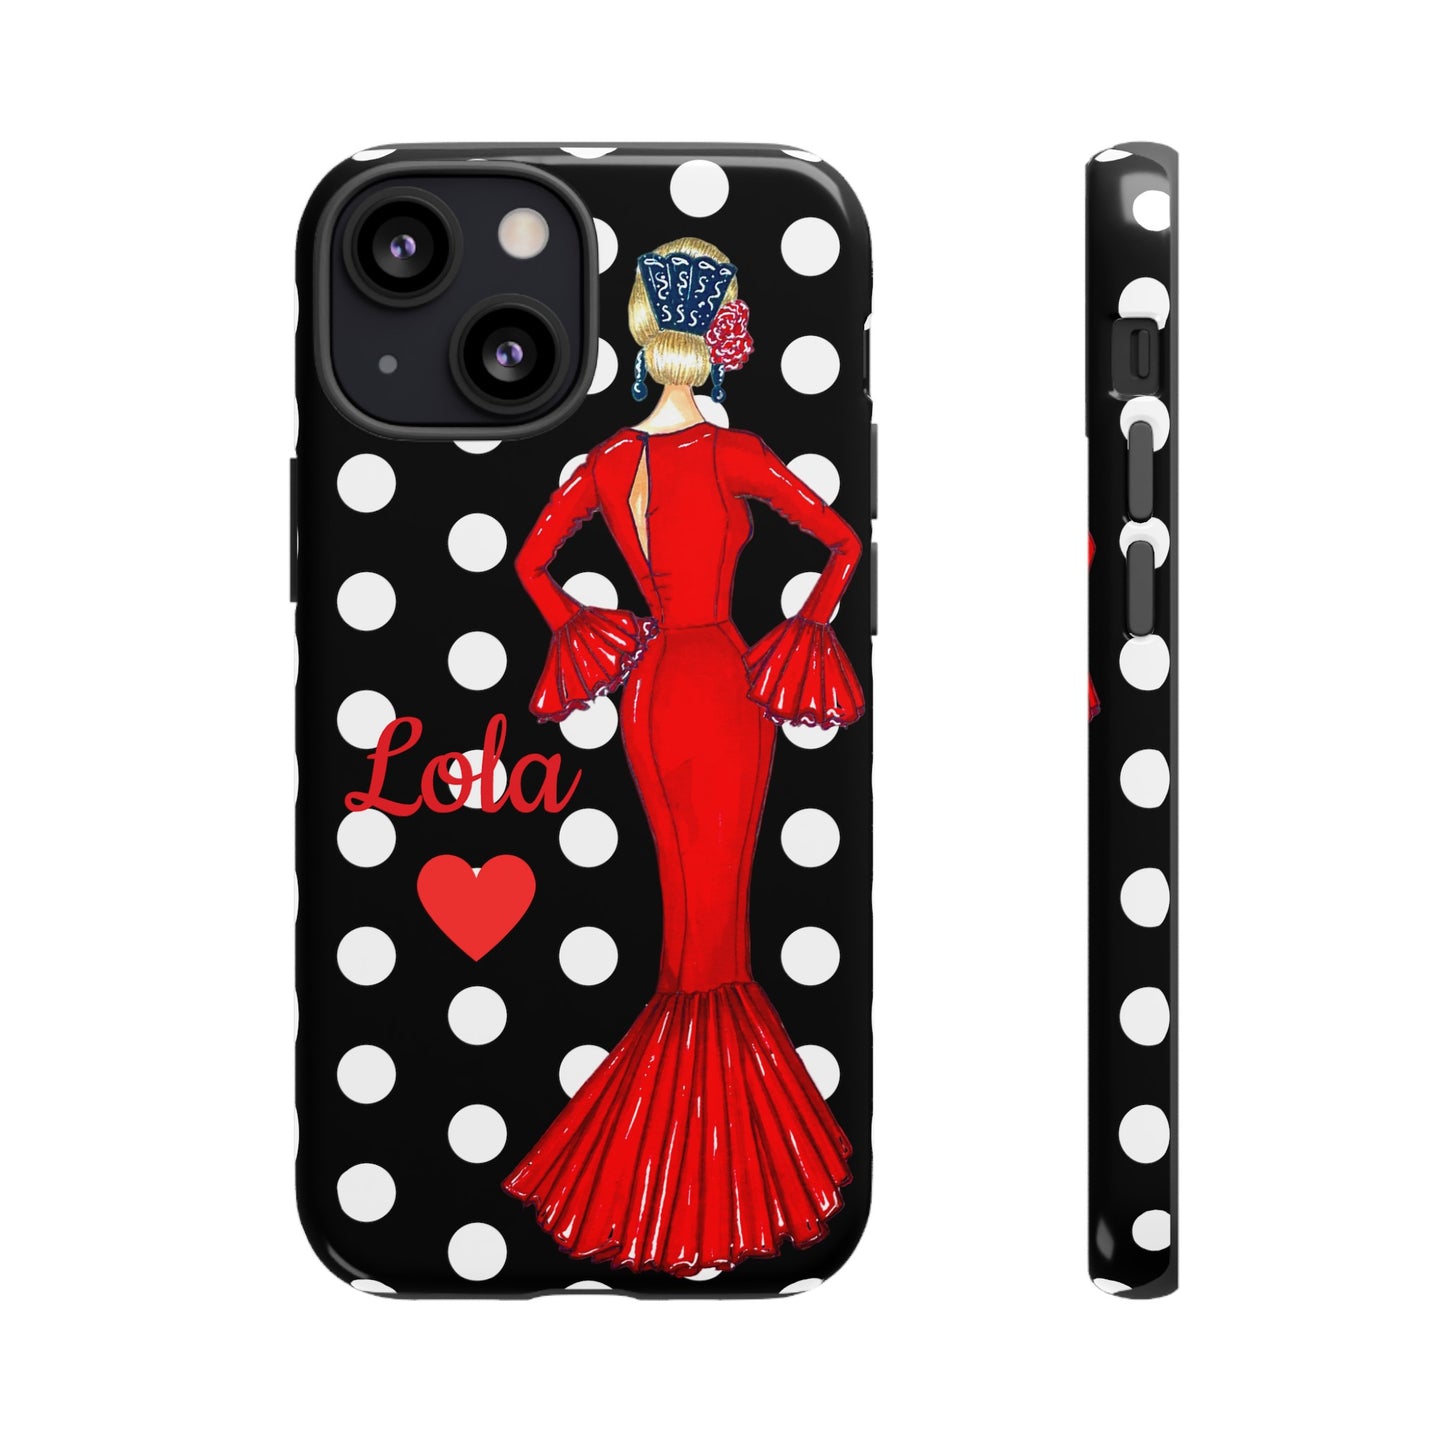 Flamenco Dancer customizable black Phone Case for iPhone, Samsung Galaxy, and Google Pixel, flamenco dancer Maria in a red dres, black background with polka dots.